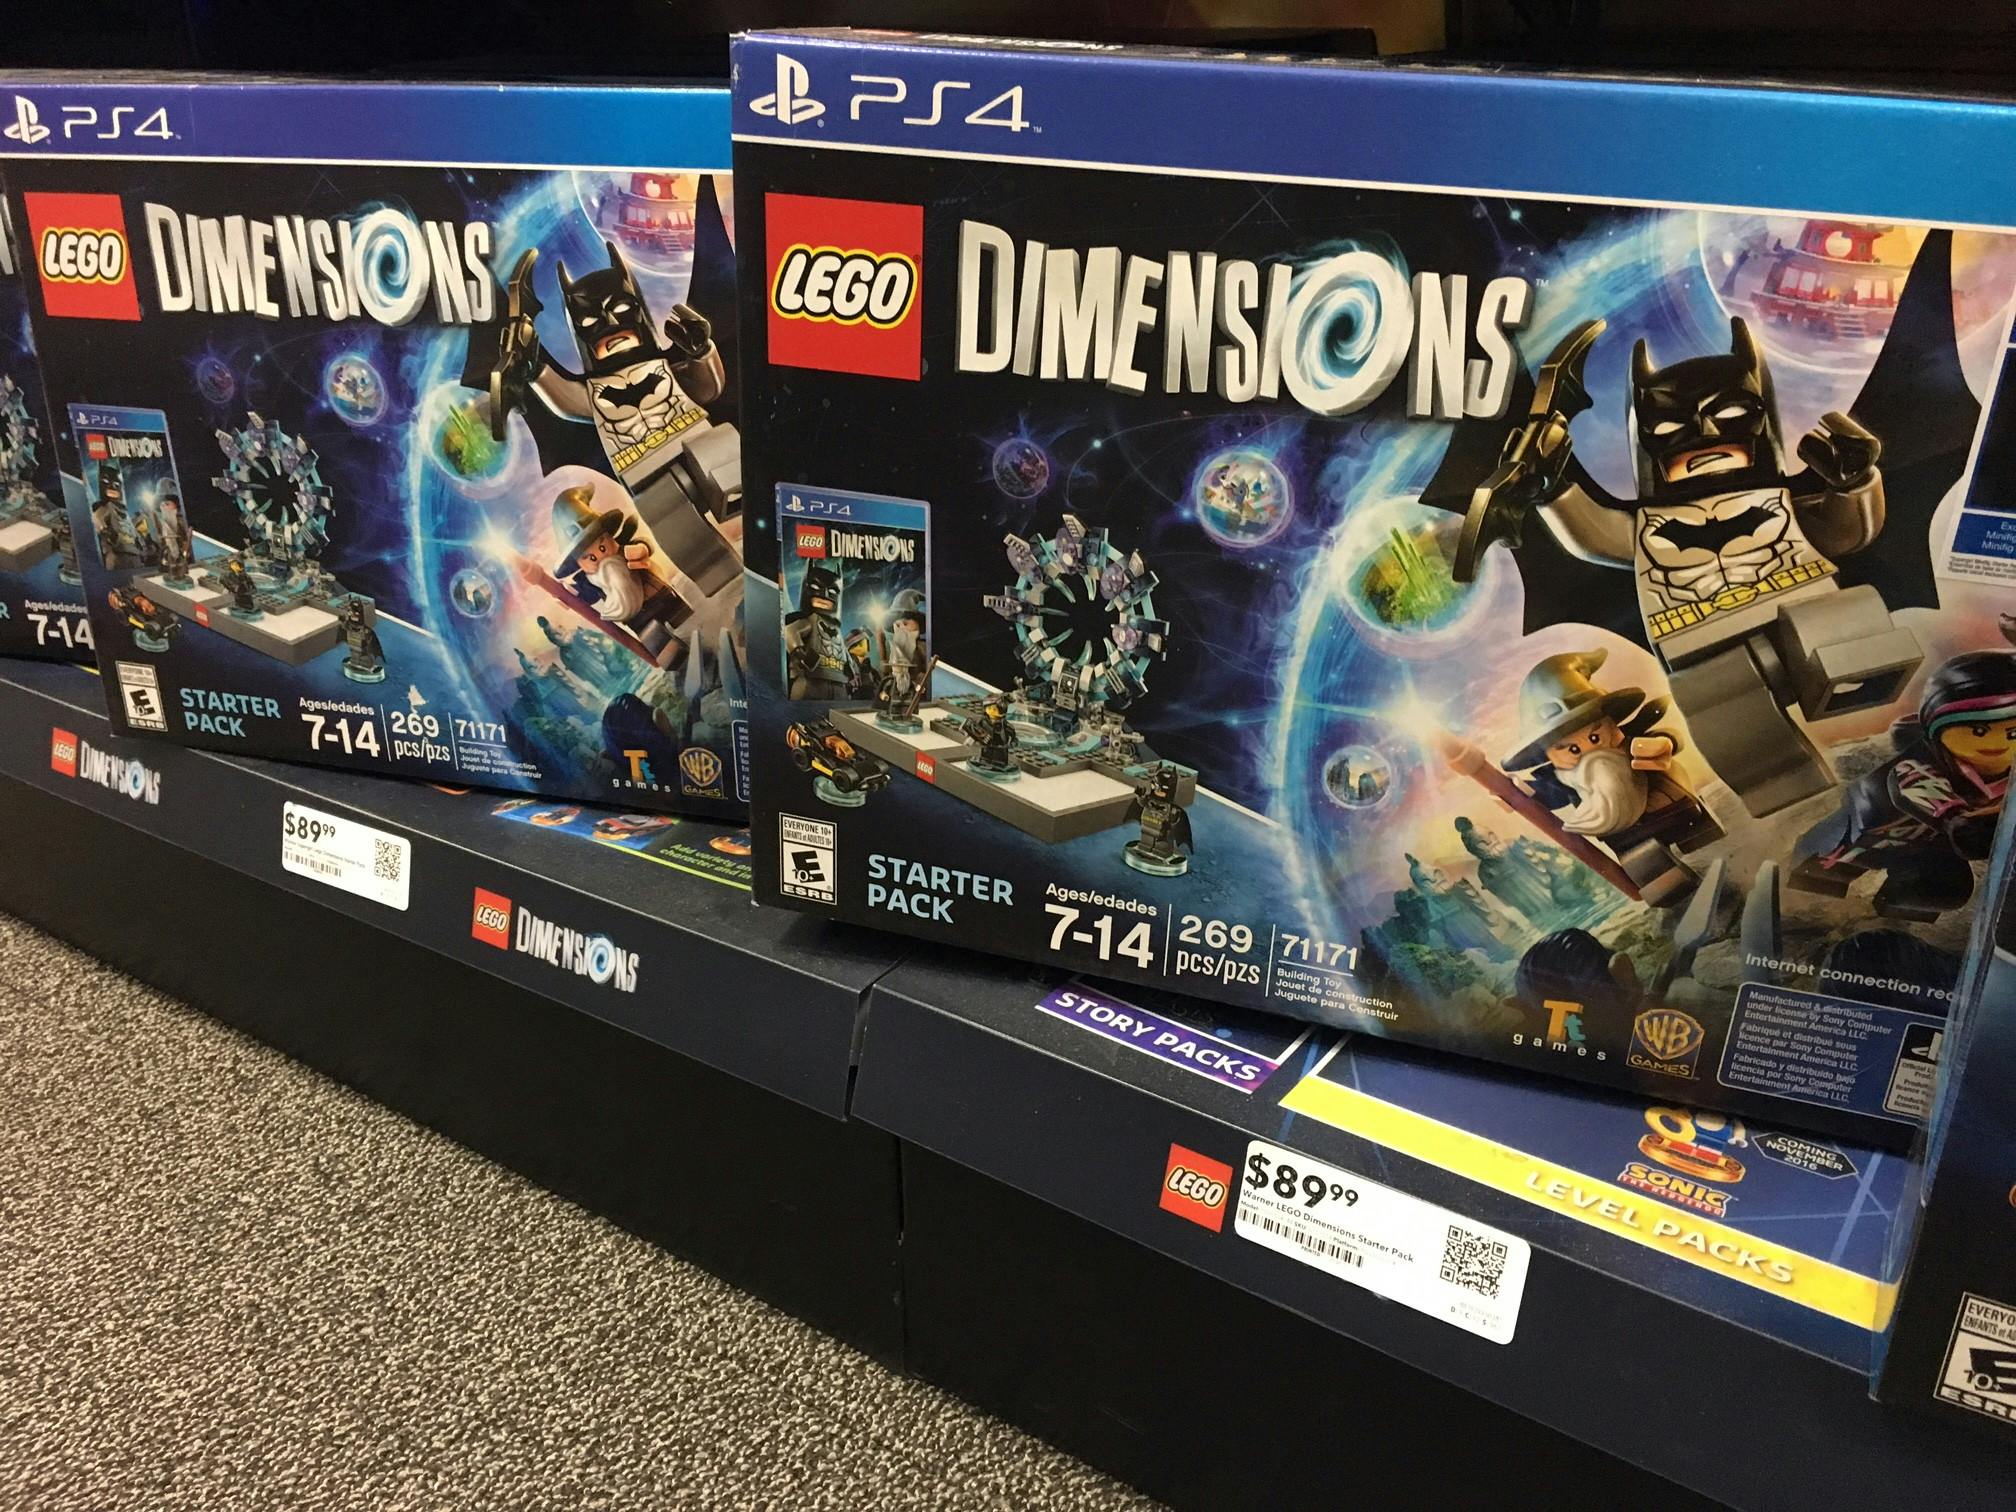 buy lego dimensions ps4